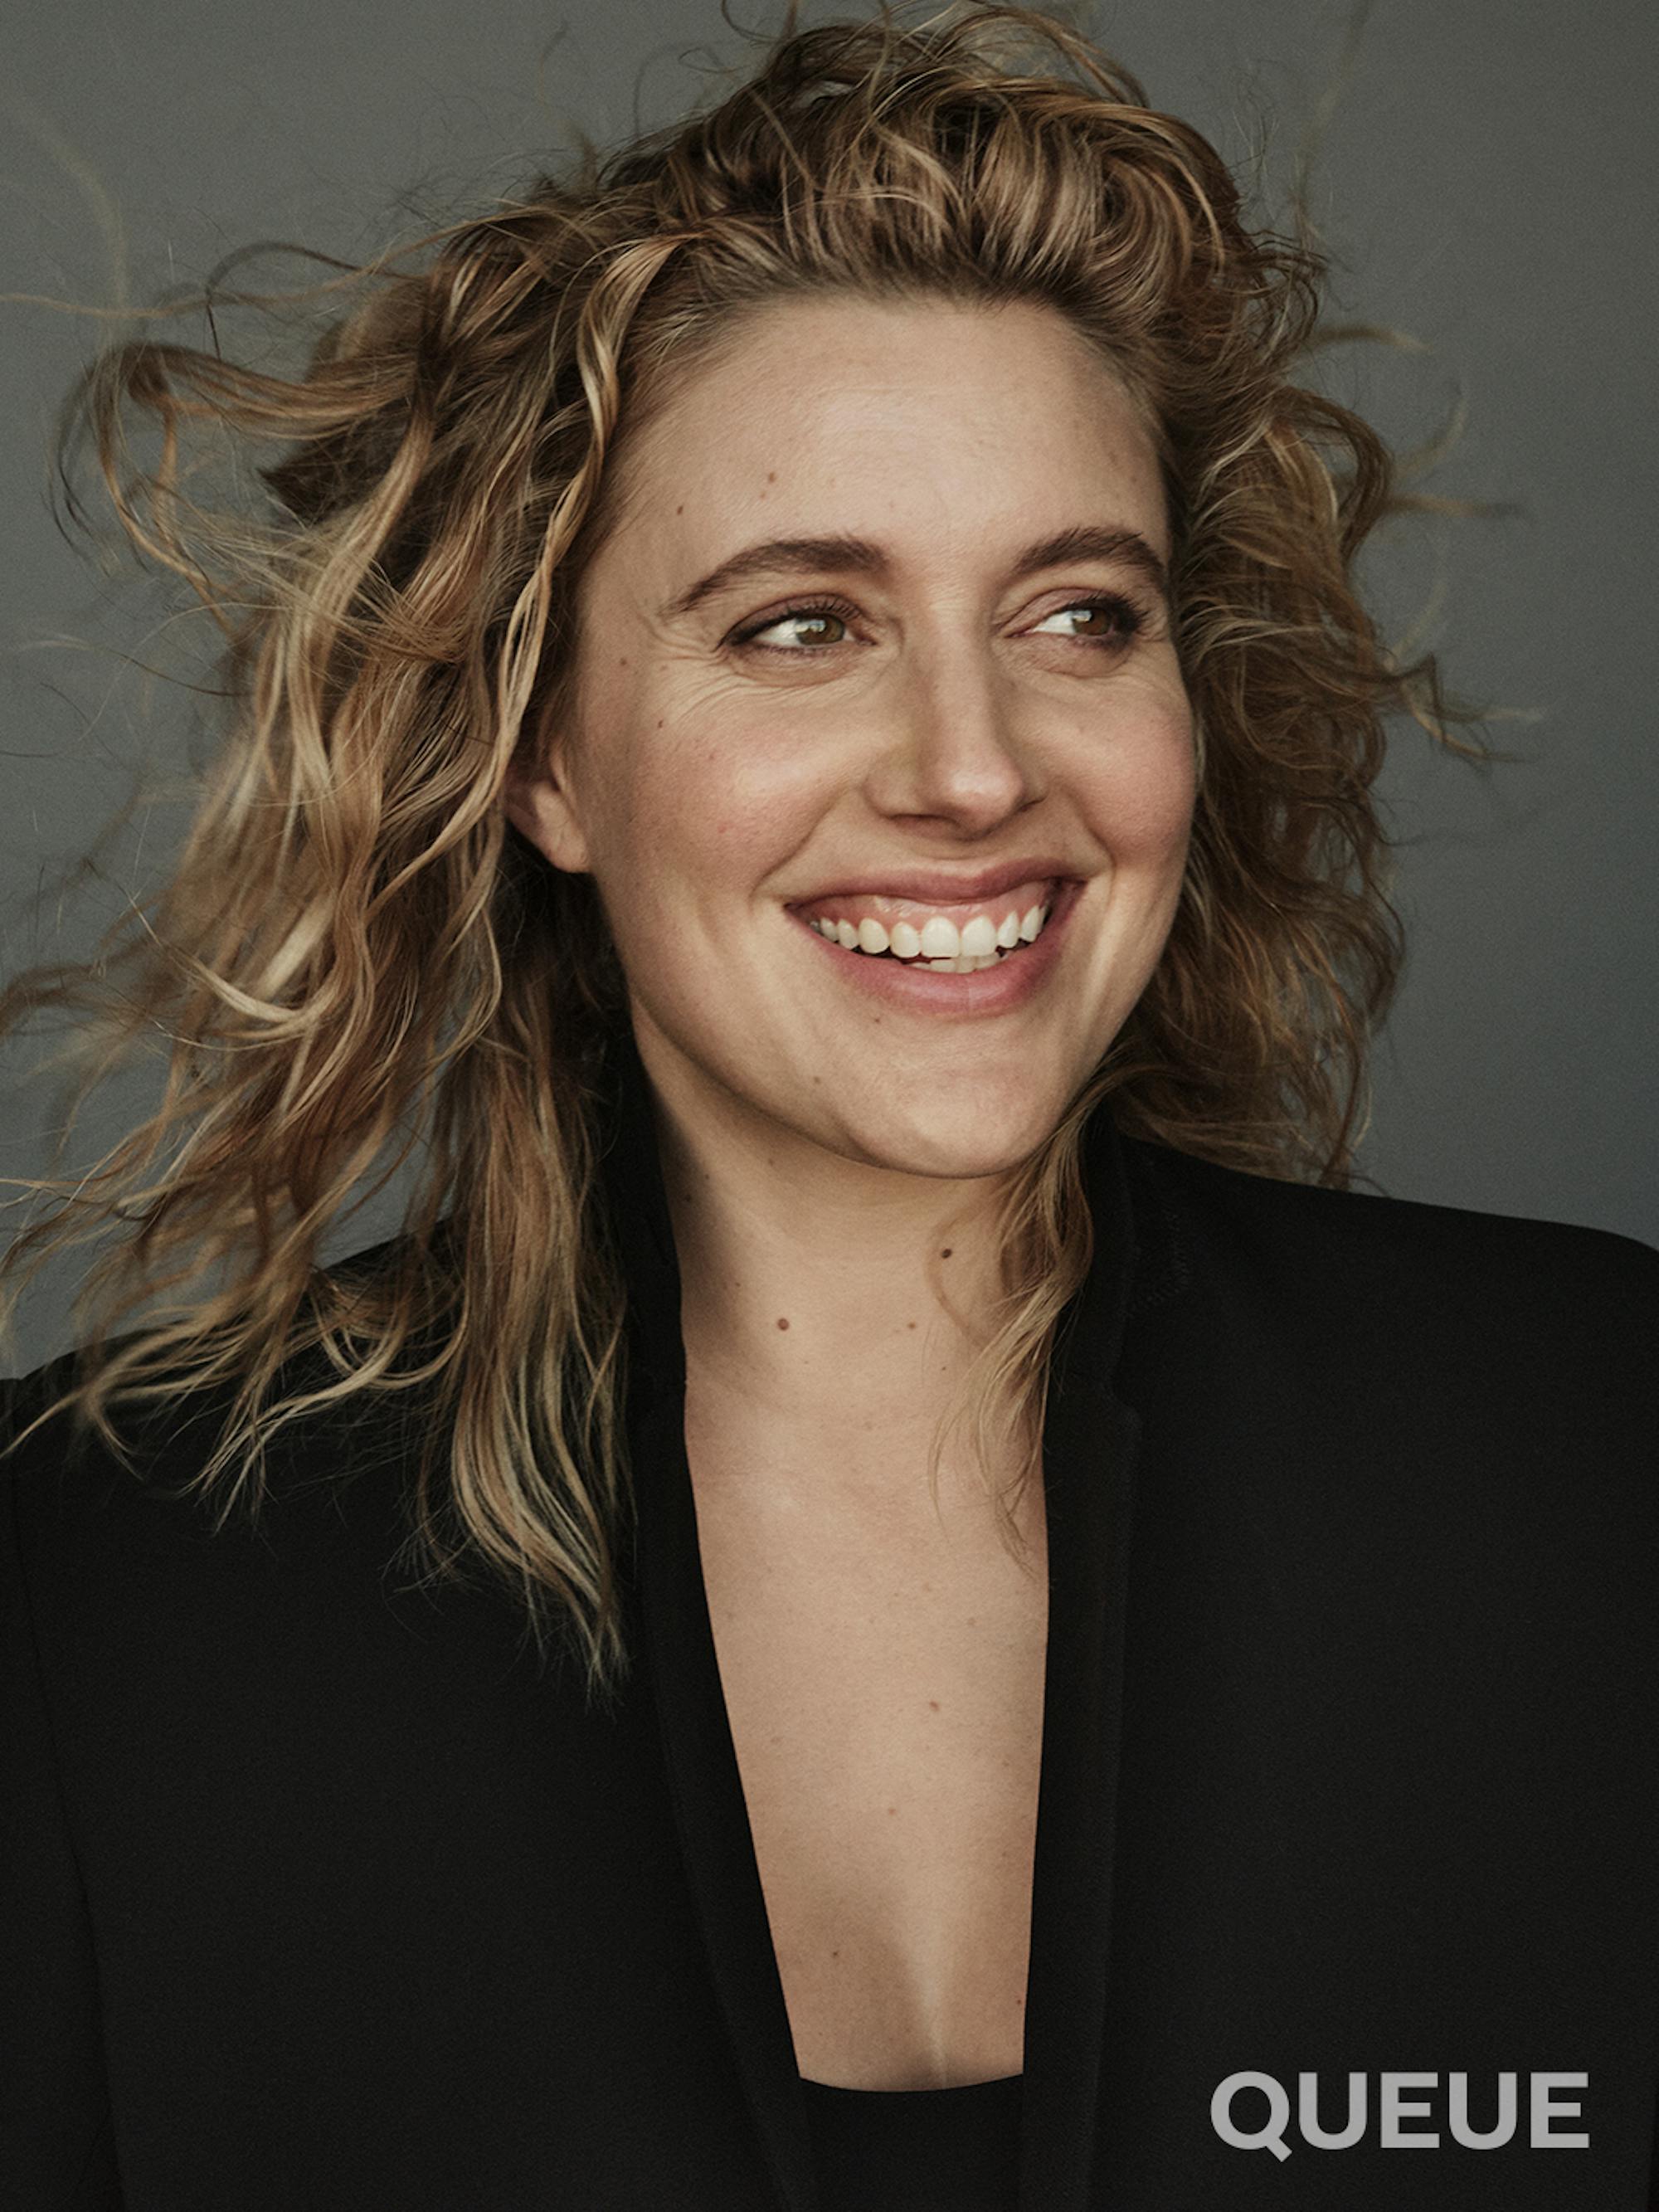 Greta Gerwig wears a black blazer and smiles at something off-camera on Queue's Issue 11 cover.